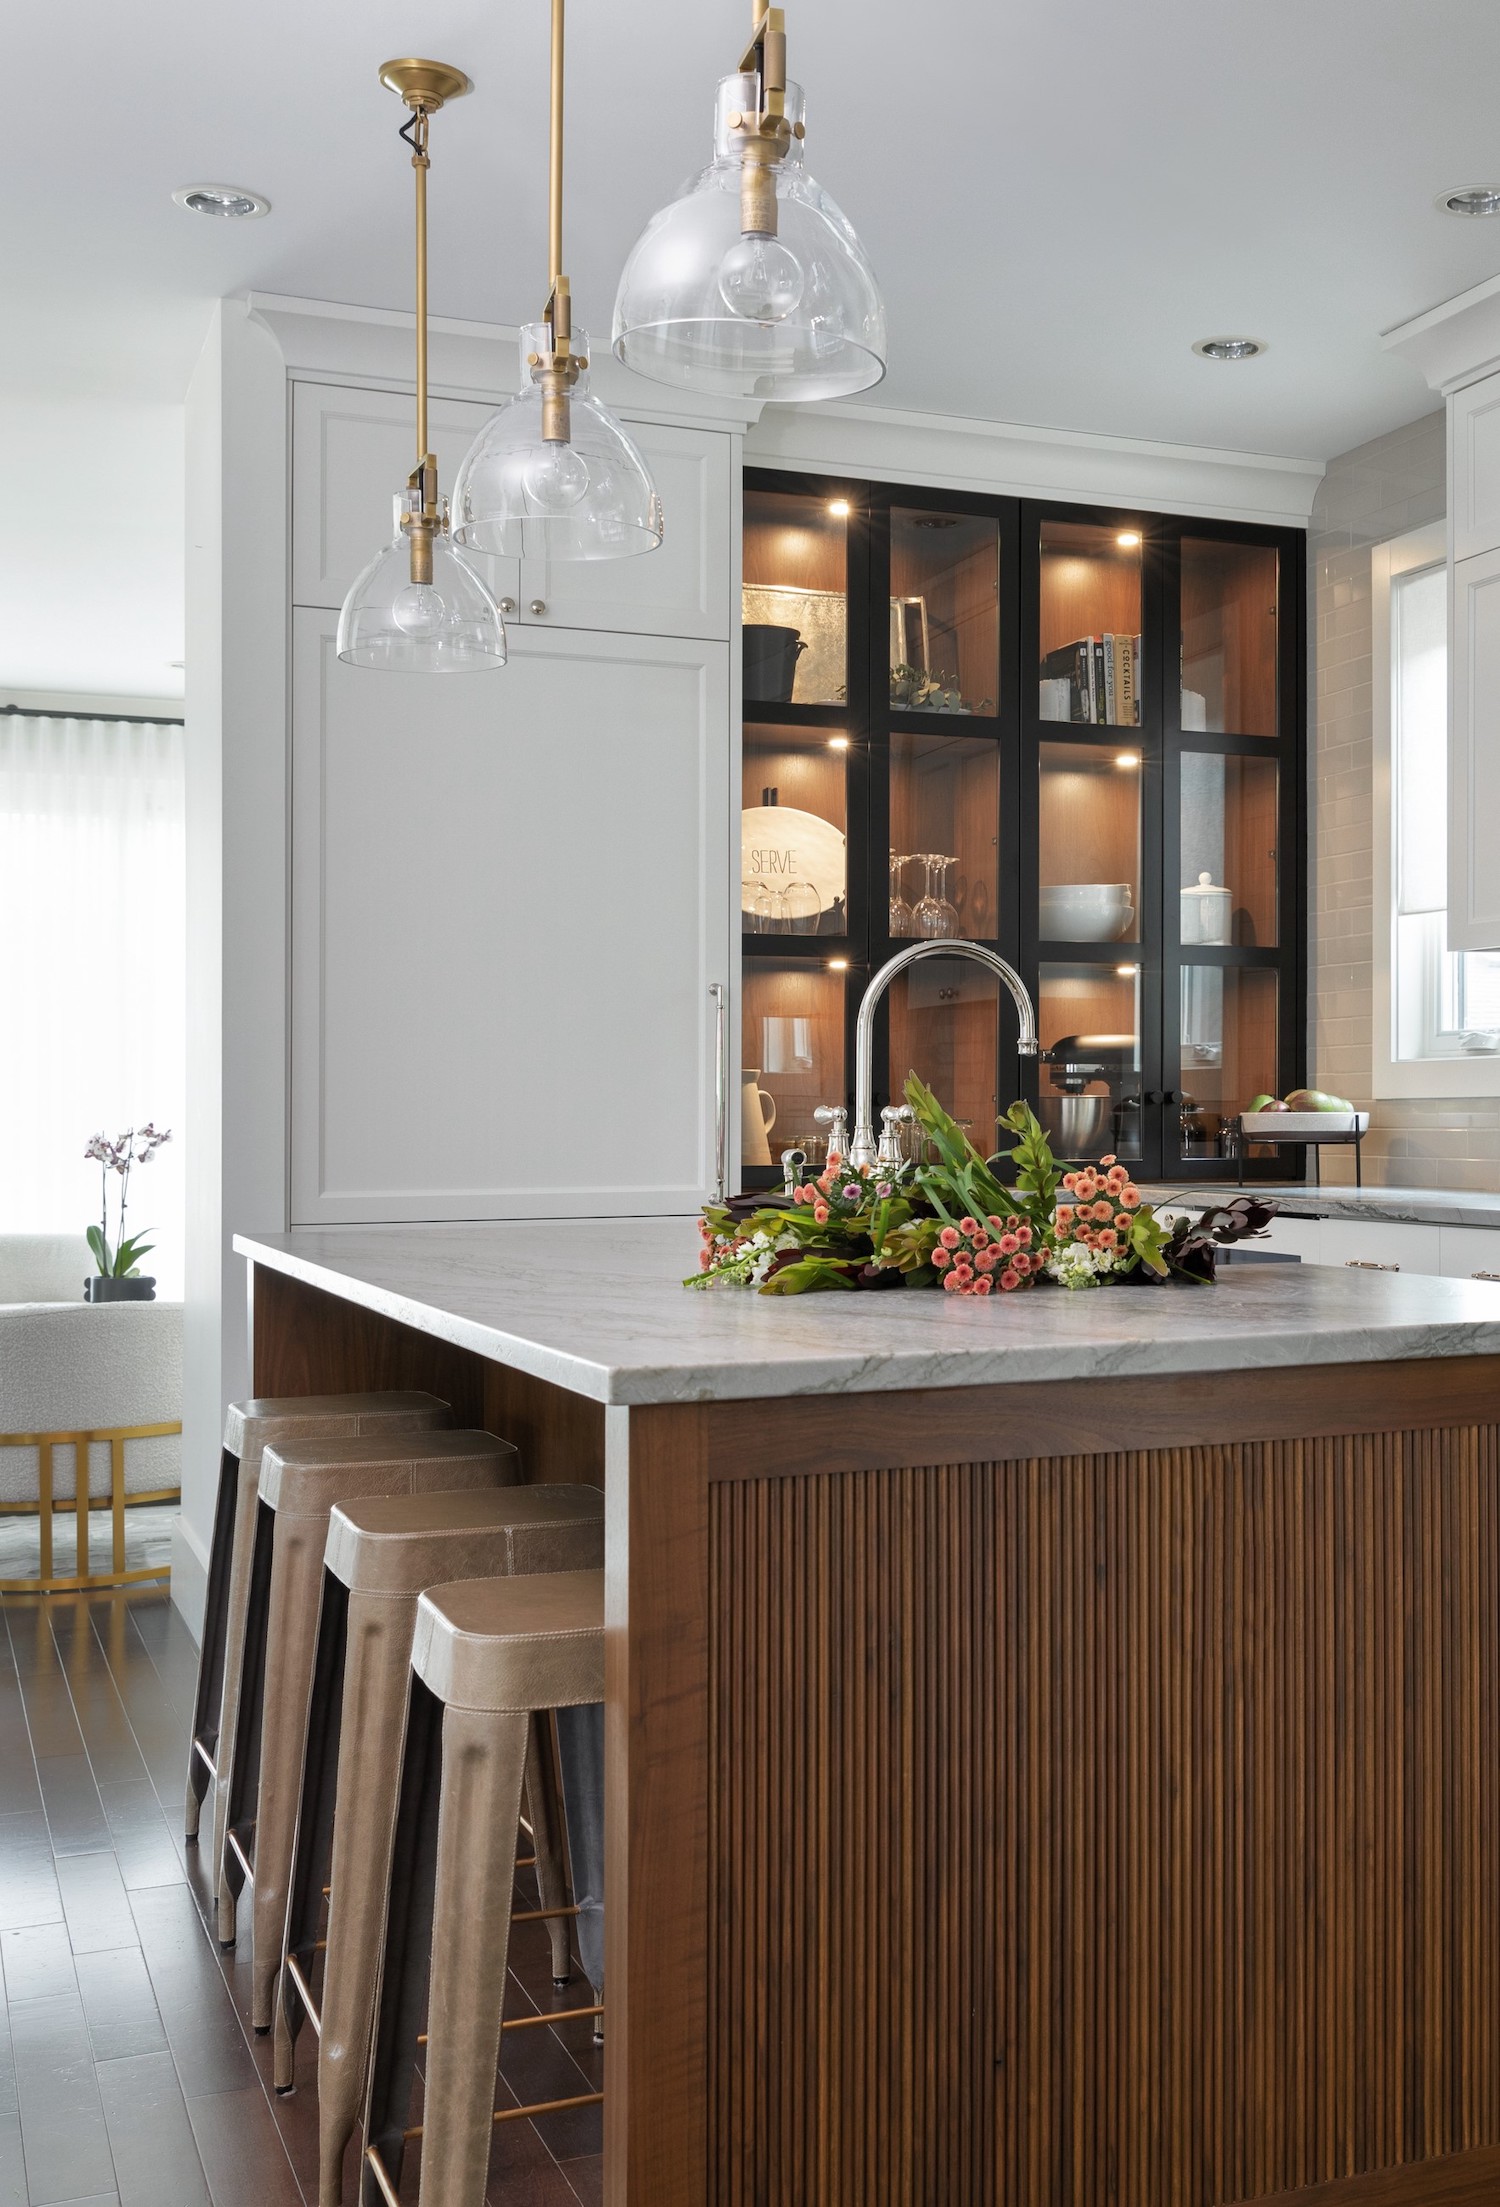 Custom details can transform the kitchen